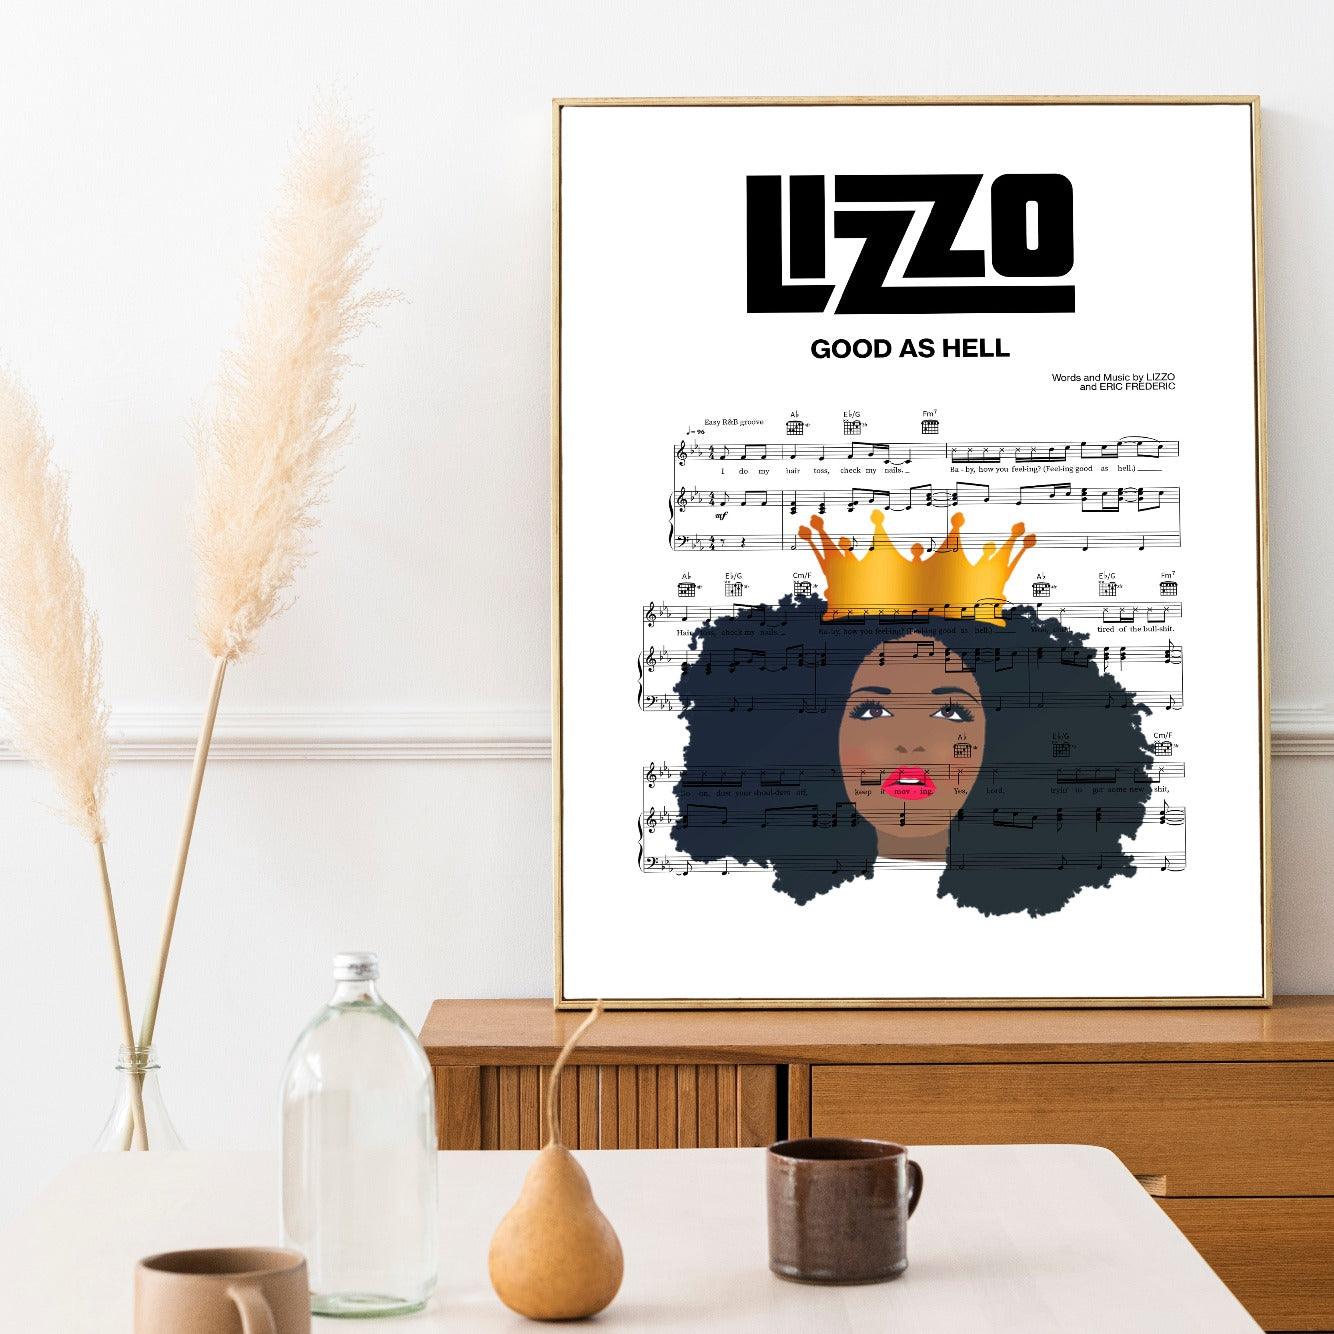 Add a touch of personality to your home decor with this Lizzo - GOOD AS HELL Poster by 98Types Music. Featuring stunning art and timeless lyrics, this poster ends up making for a great first dance wedding song! Printed on high-quality paper, its simple design makes it the perfect addition to any kitchen or living room space. Whether you're buying it for yourself or as a gift, this poster is sure to be cherished by all. With such great quality and design, you can't go wrong with it!